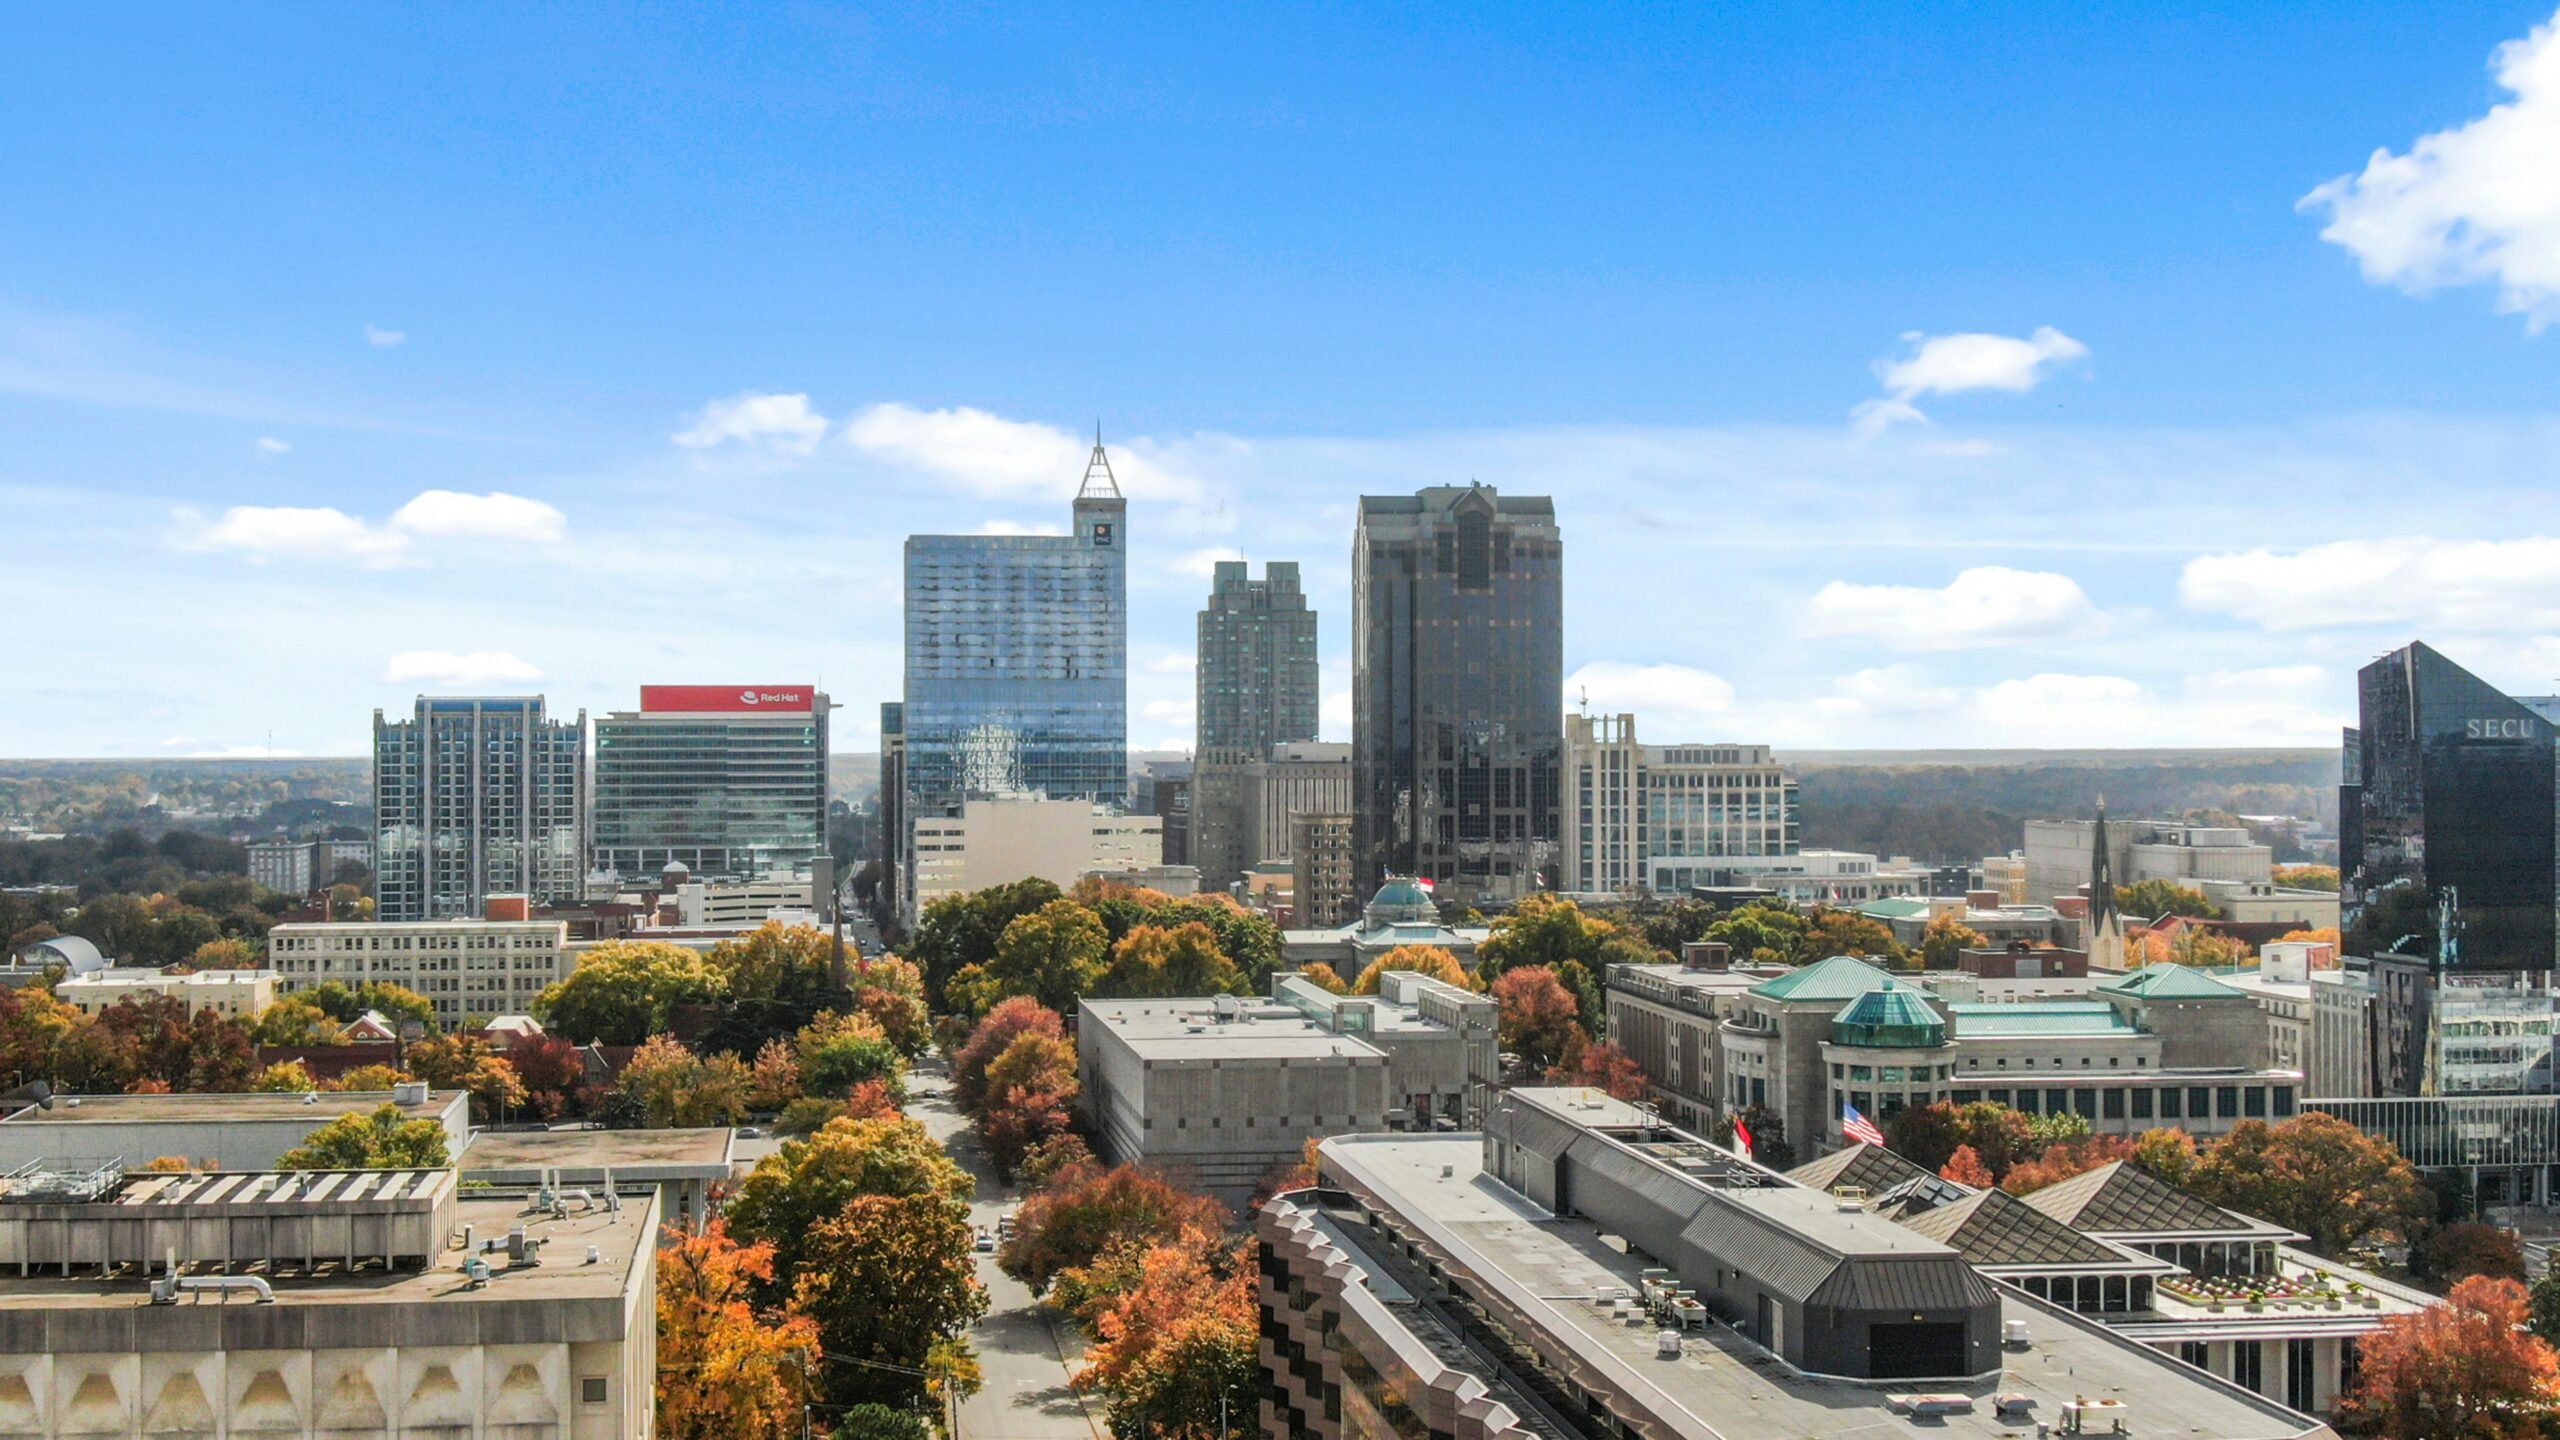 If you're looking to move to a North Carolina city, Raleigh is one of the most affordable gay friendly cities in the U.S. and in the Carolinas. Pictured: A skyline view of Raleigh